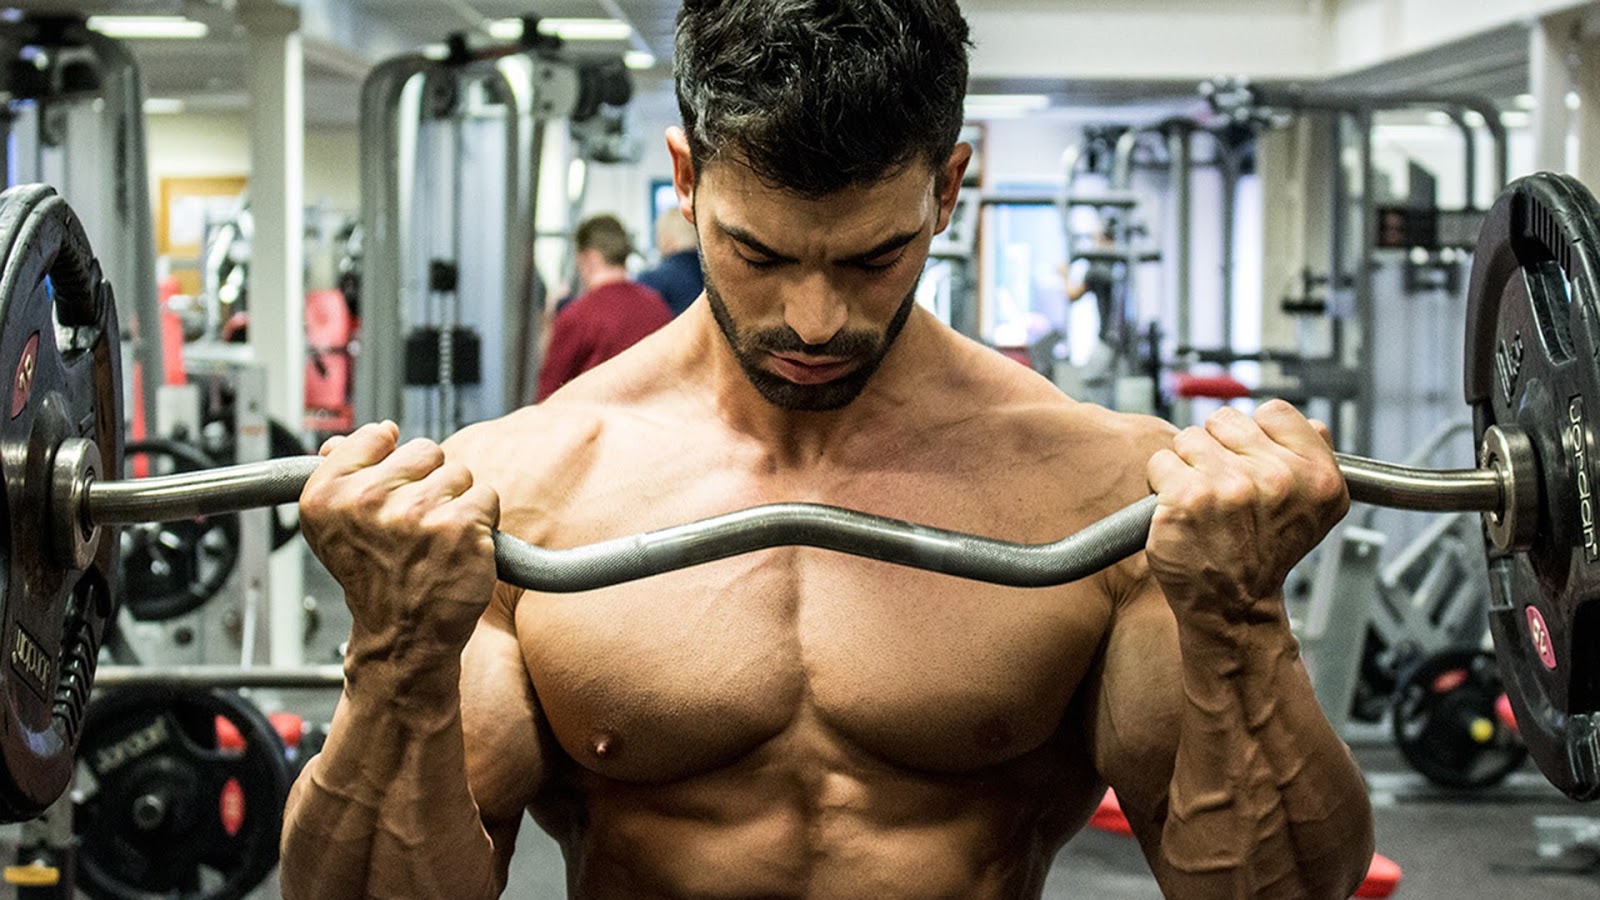 Muscle Gains Zone: 5 EXERCISES FOR BIGGER ARMS